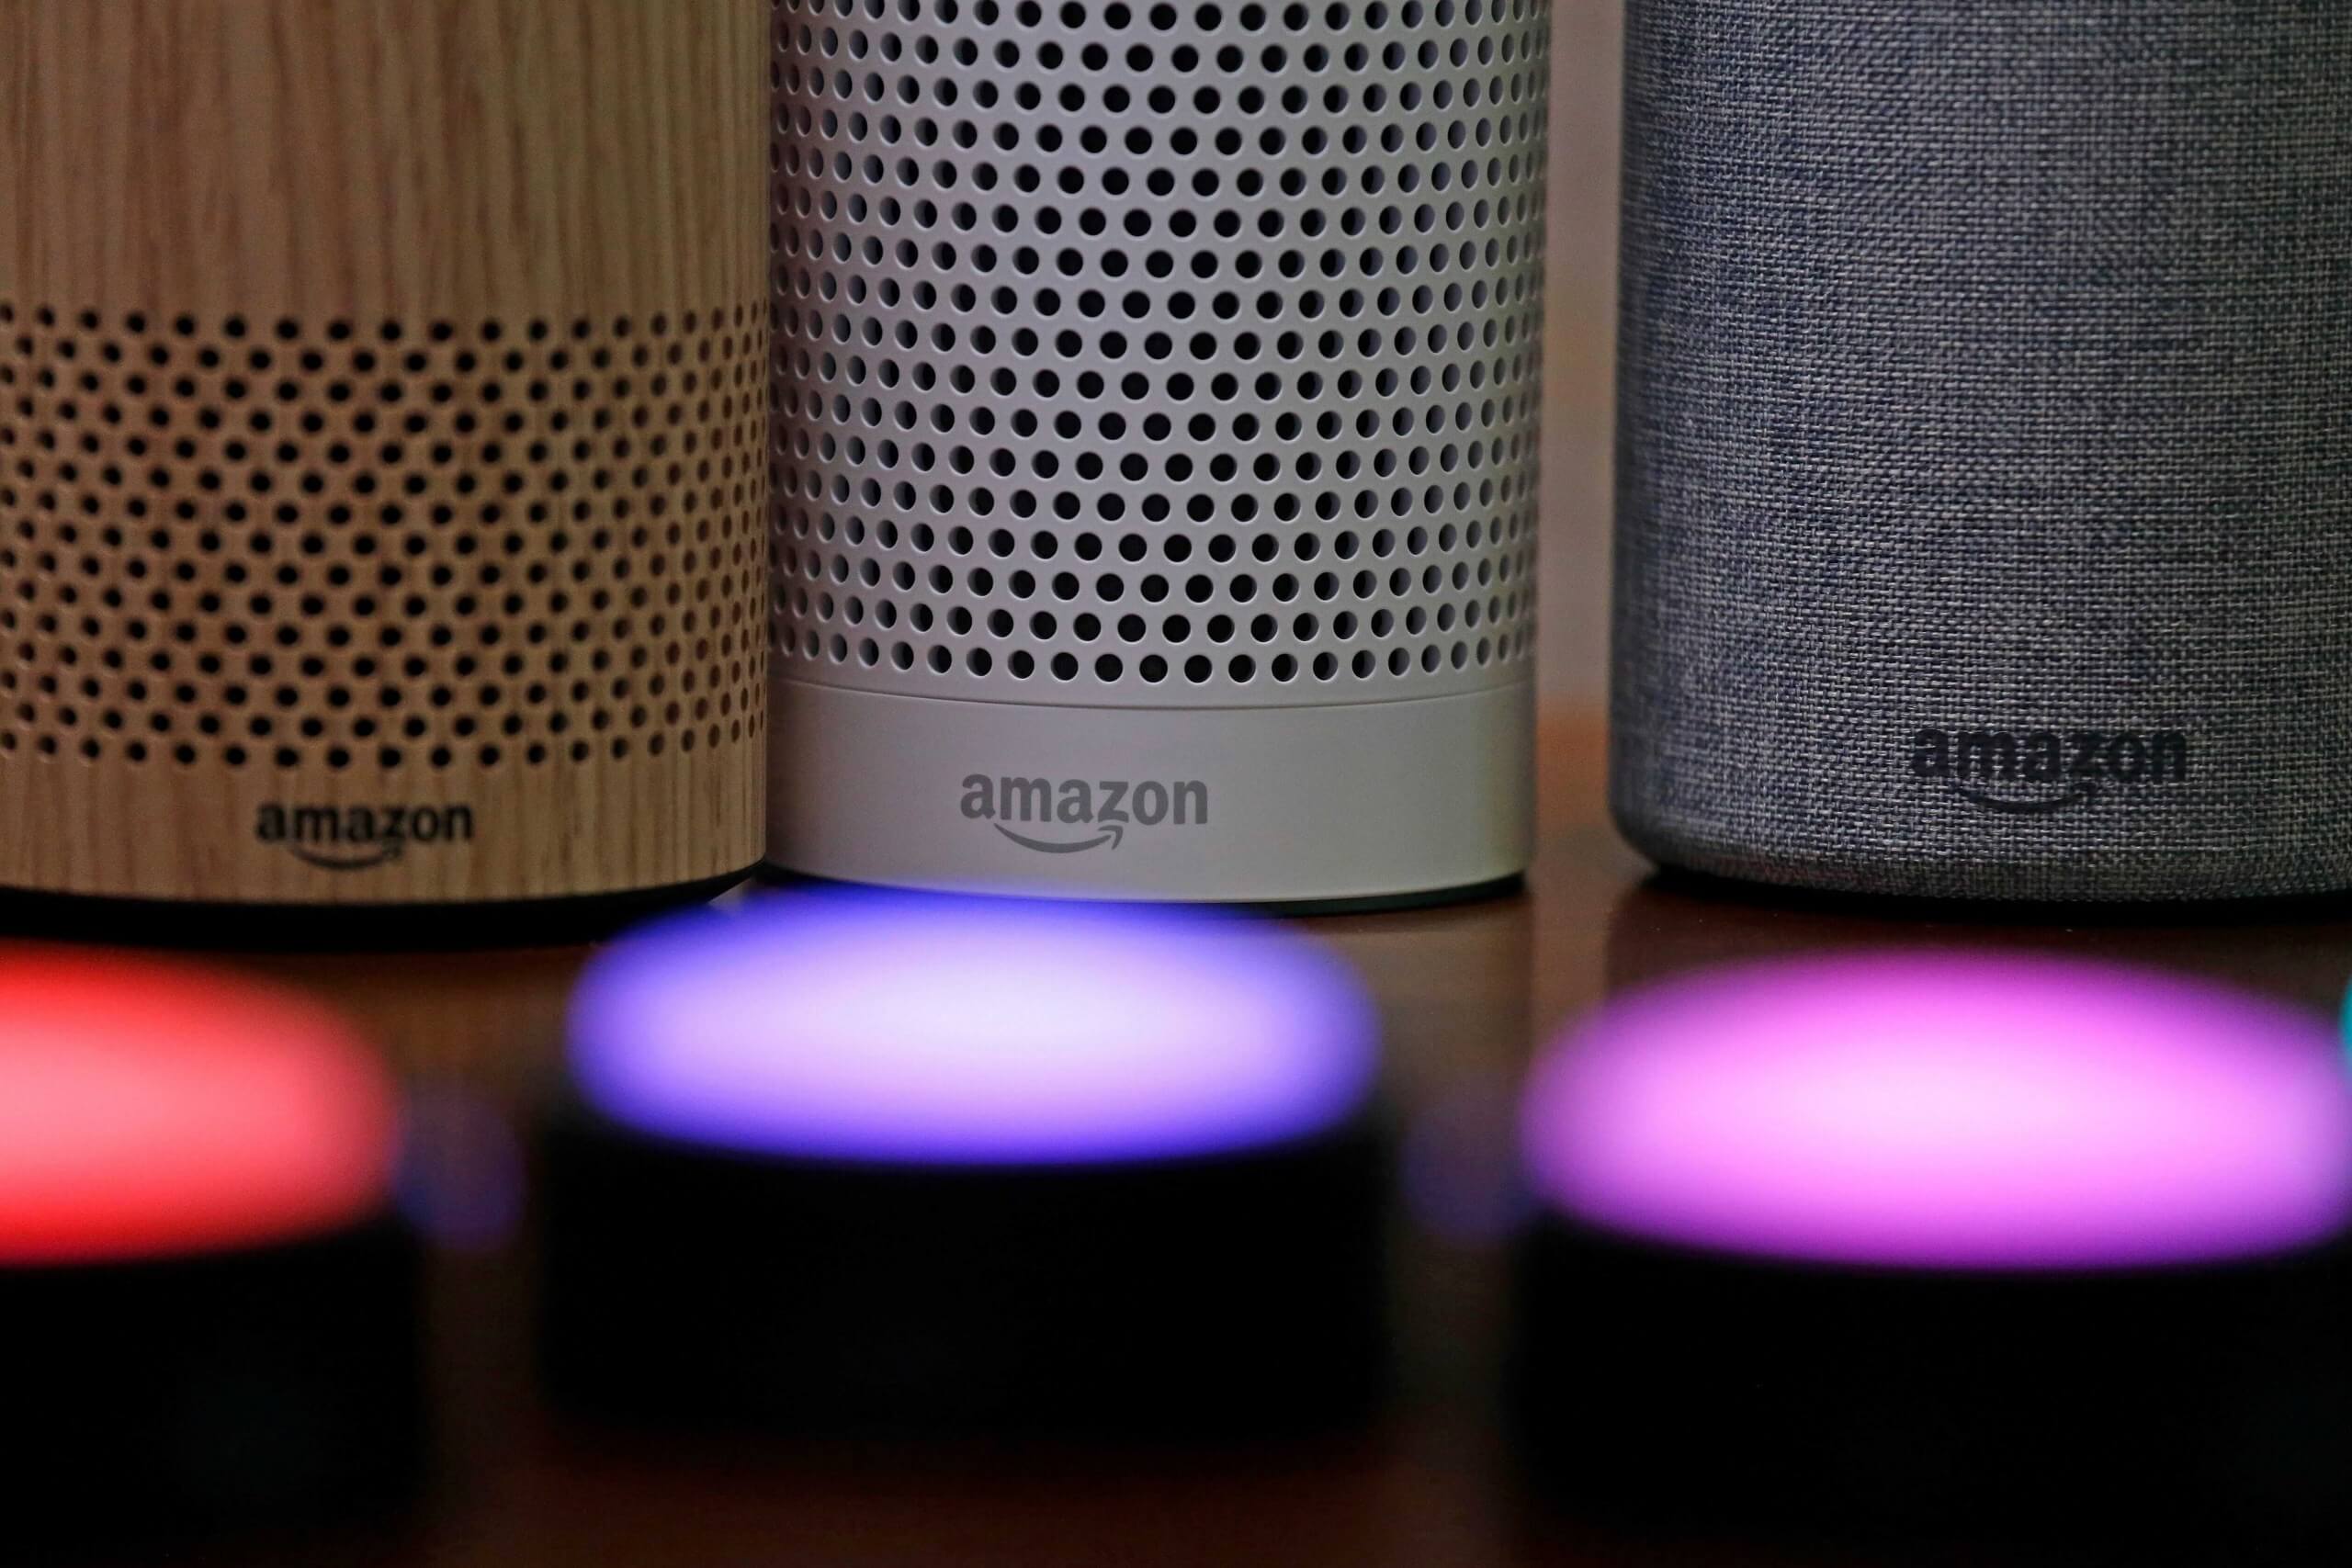 Researchers detail a now fixed exploit in Alexa that could have exposed your voice history and personal information